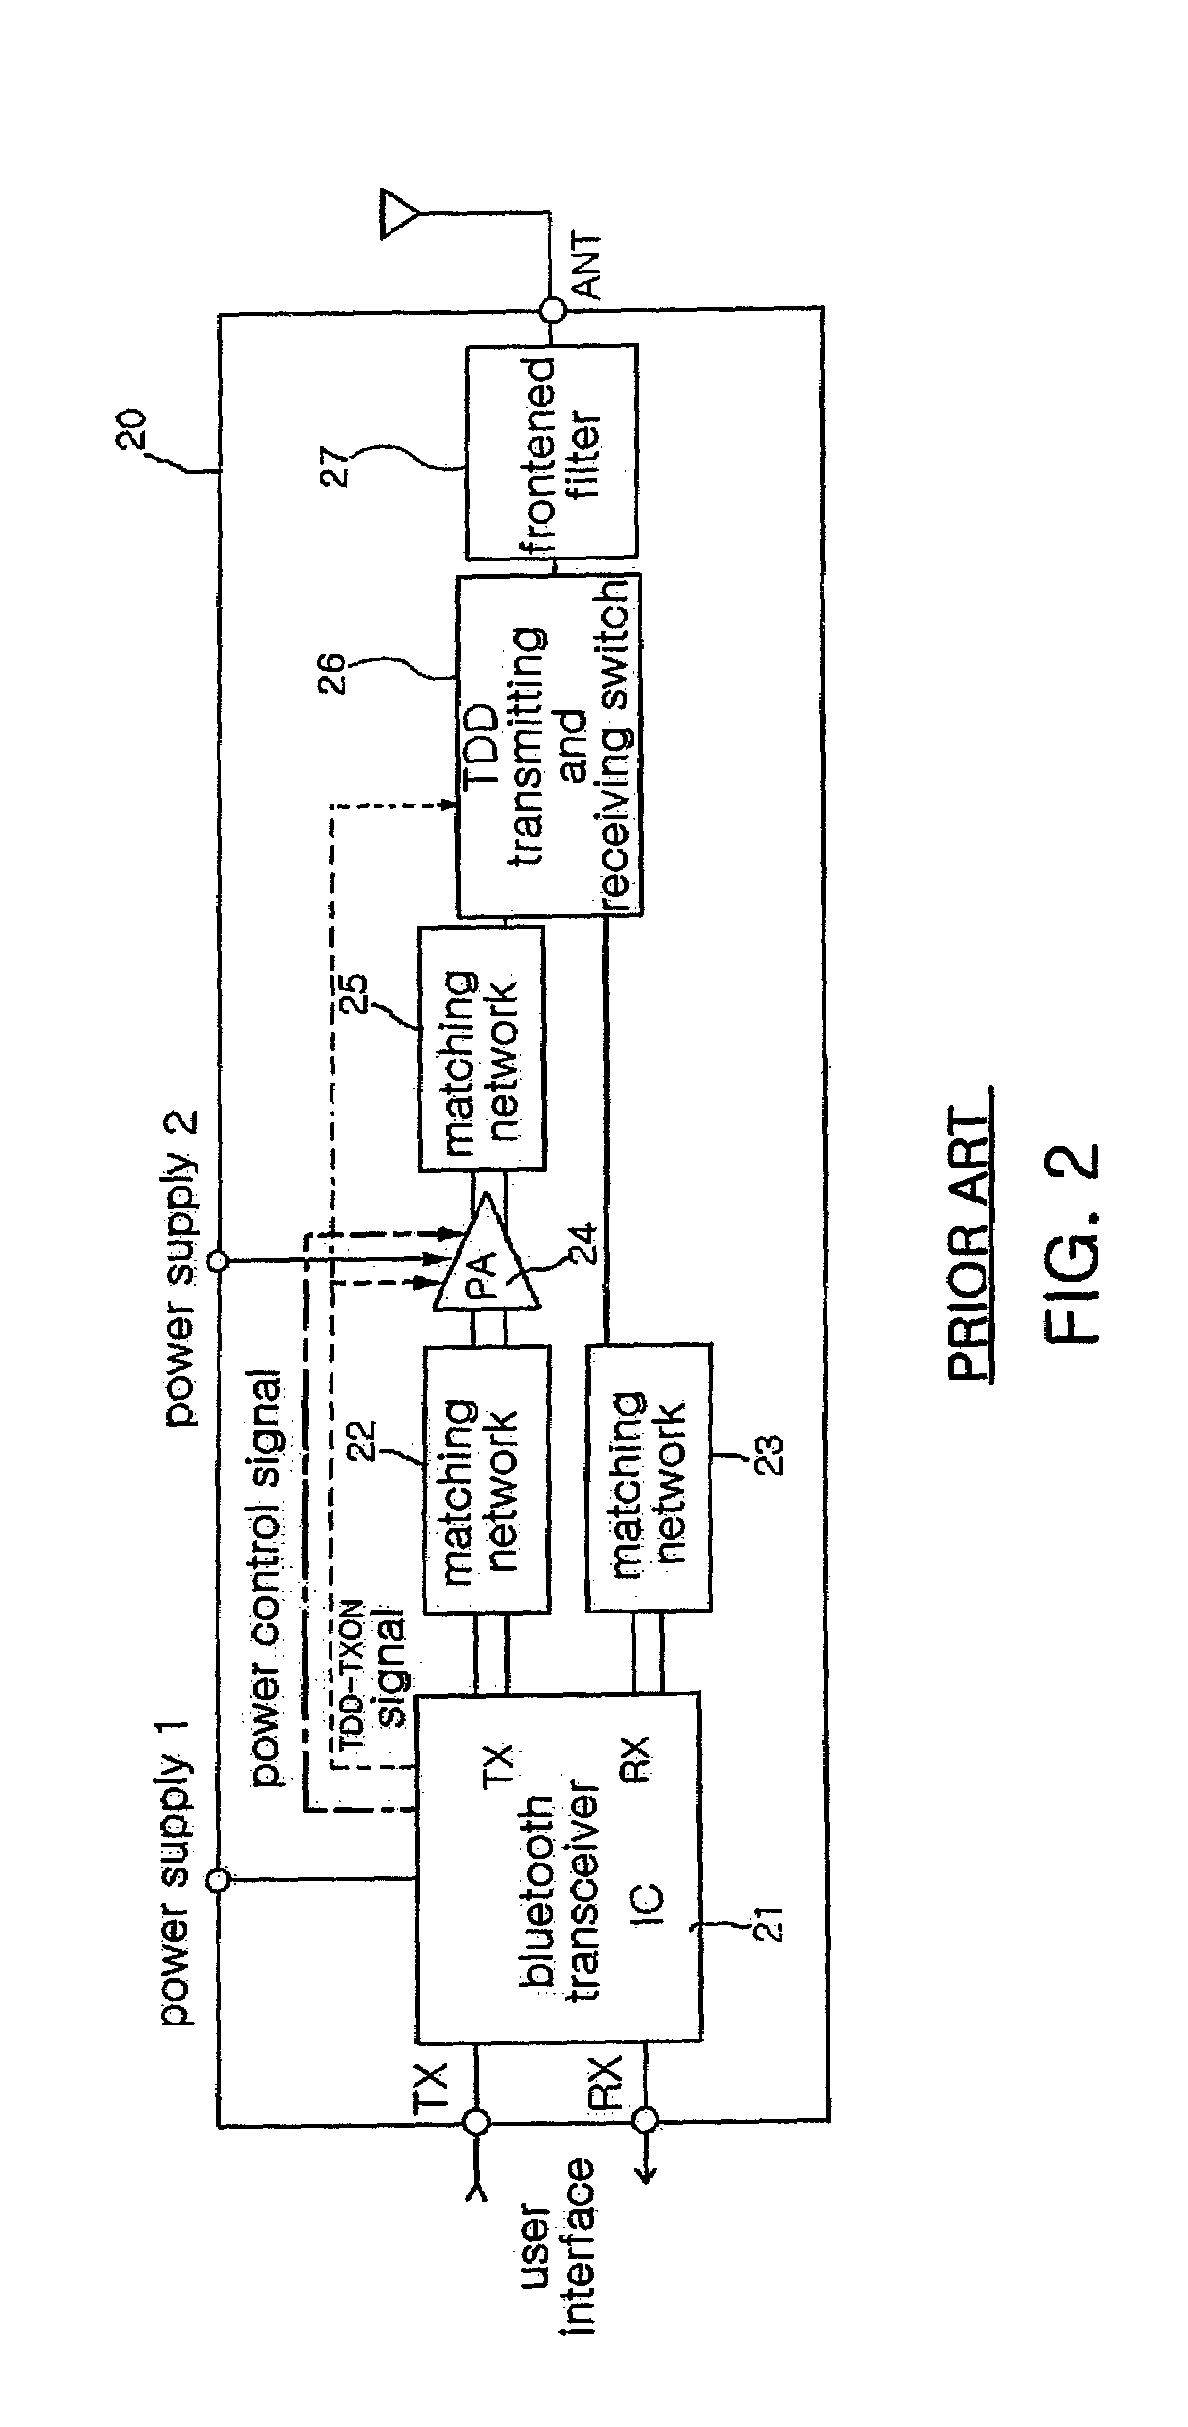 Time-division-duplexing type power amplification module